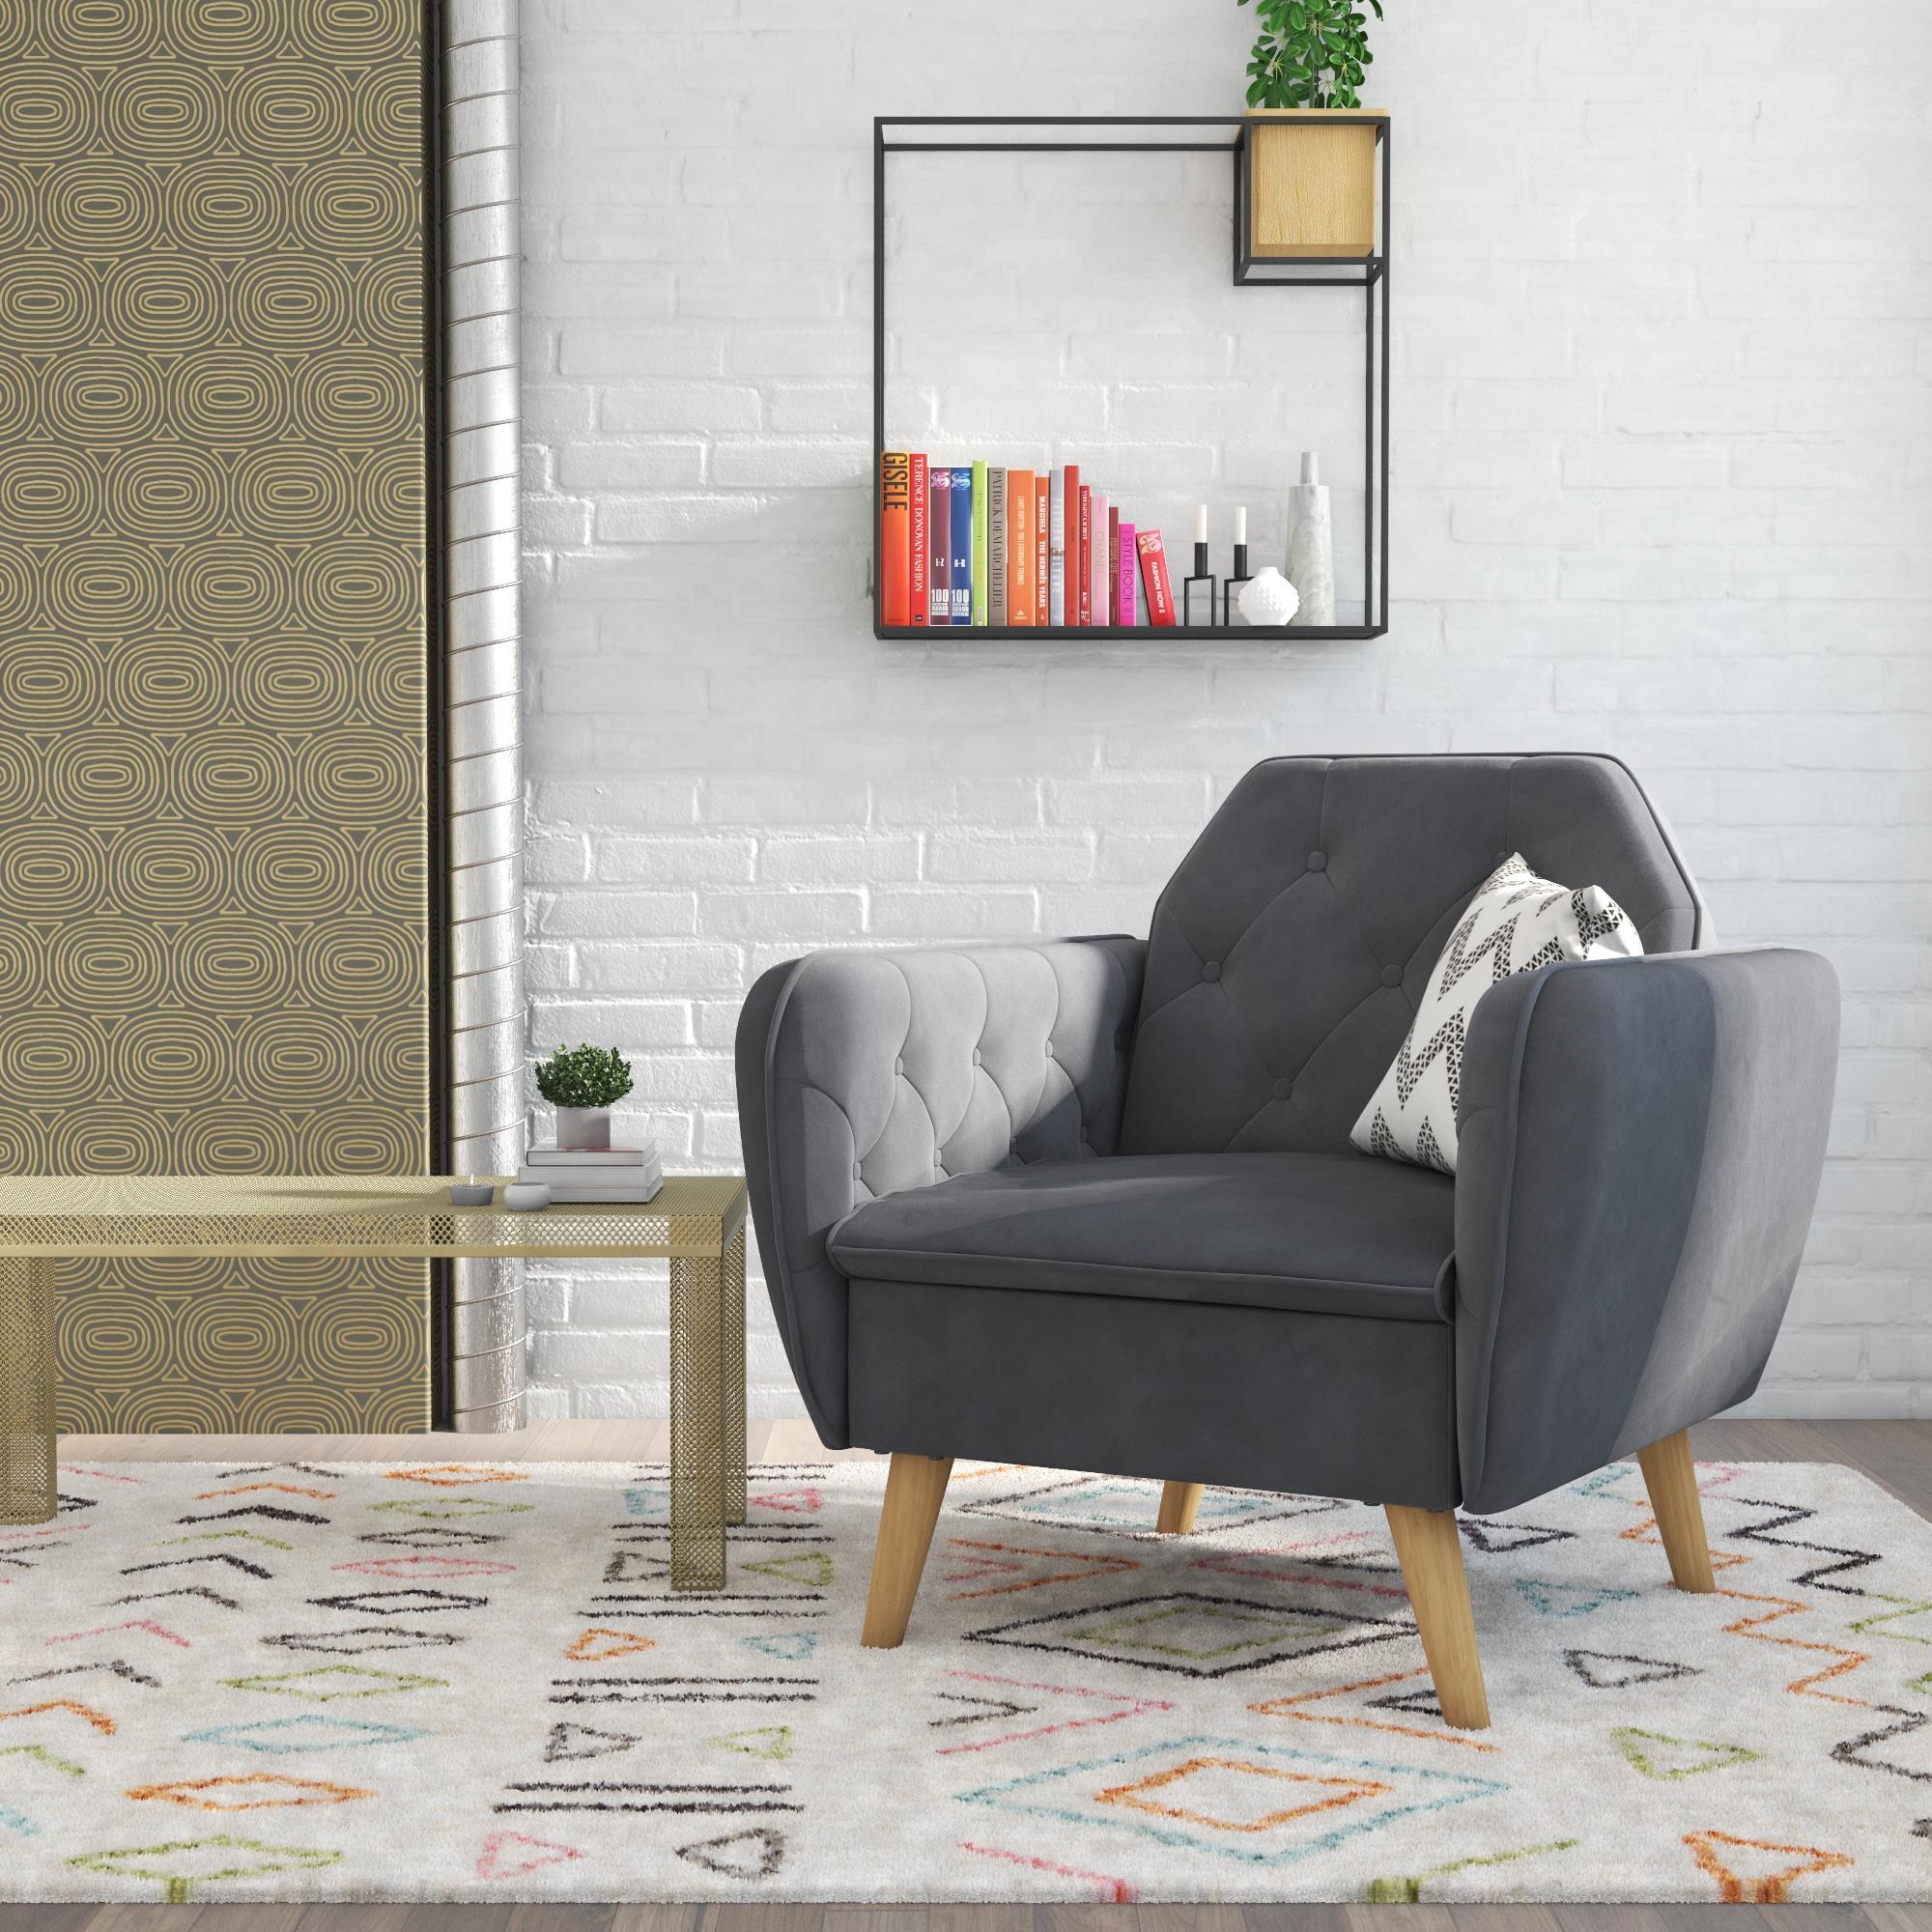 Rounded gray armchair with tufted buttons and wood legs